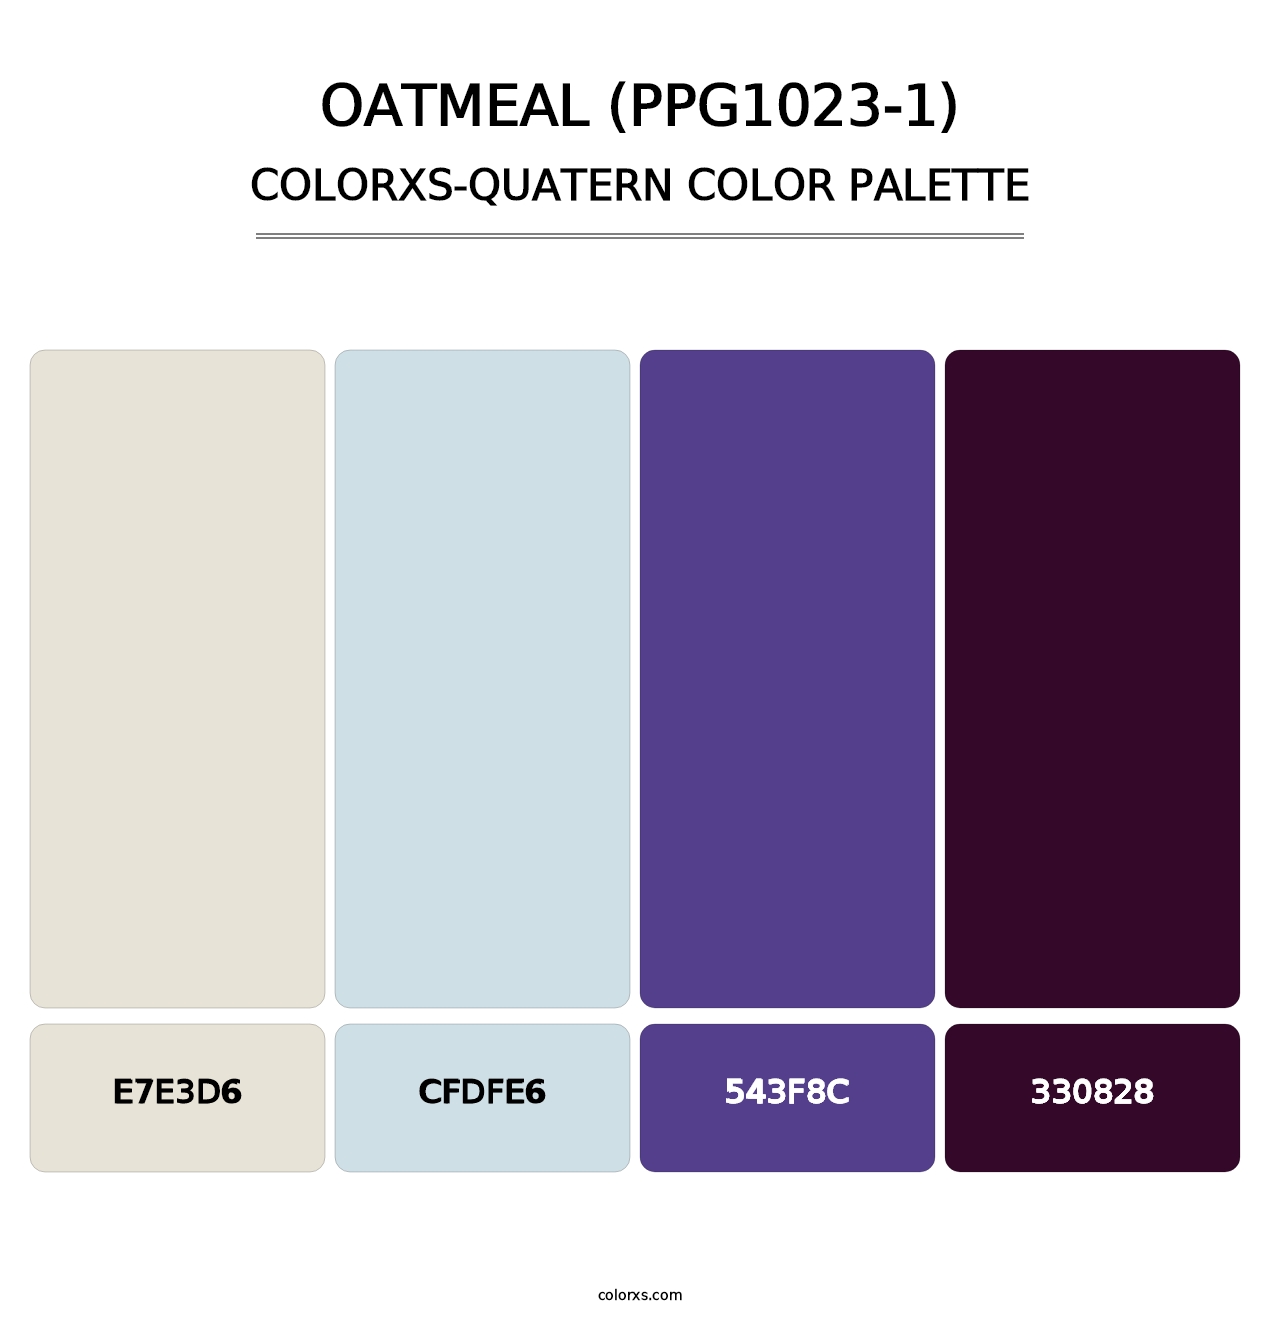 Oatmeal (PPG1023-1) - Colorxs Quatern Palette